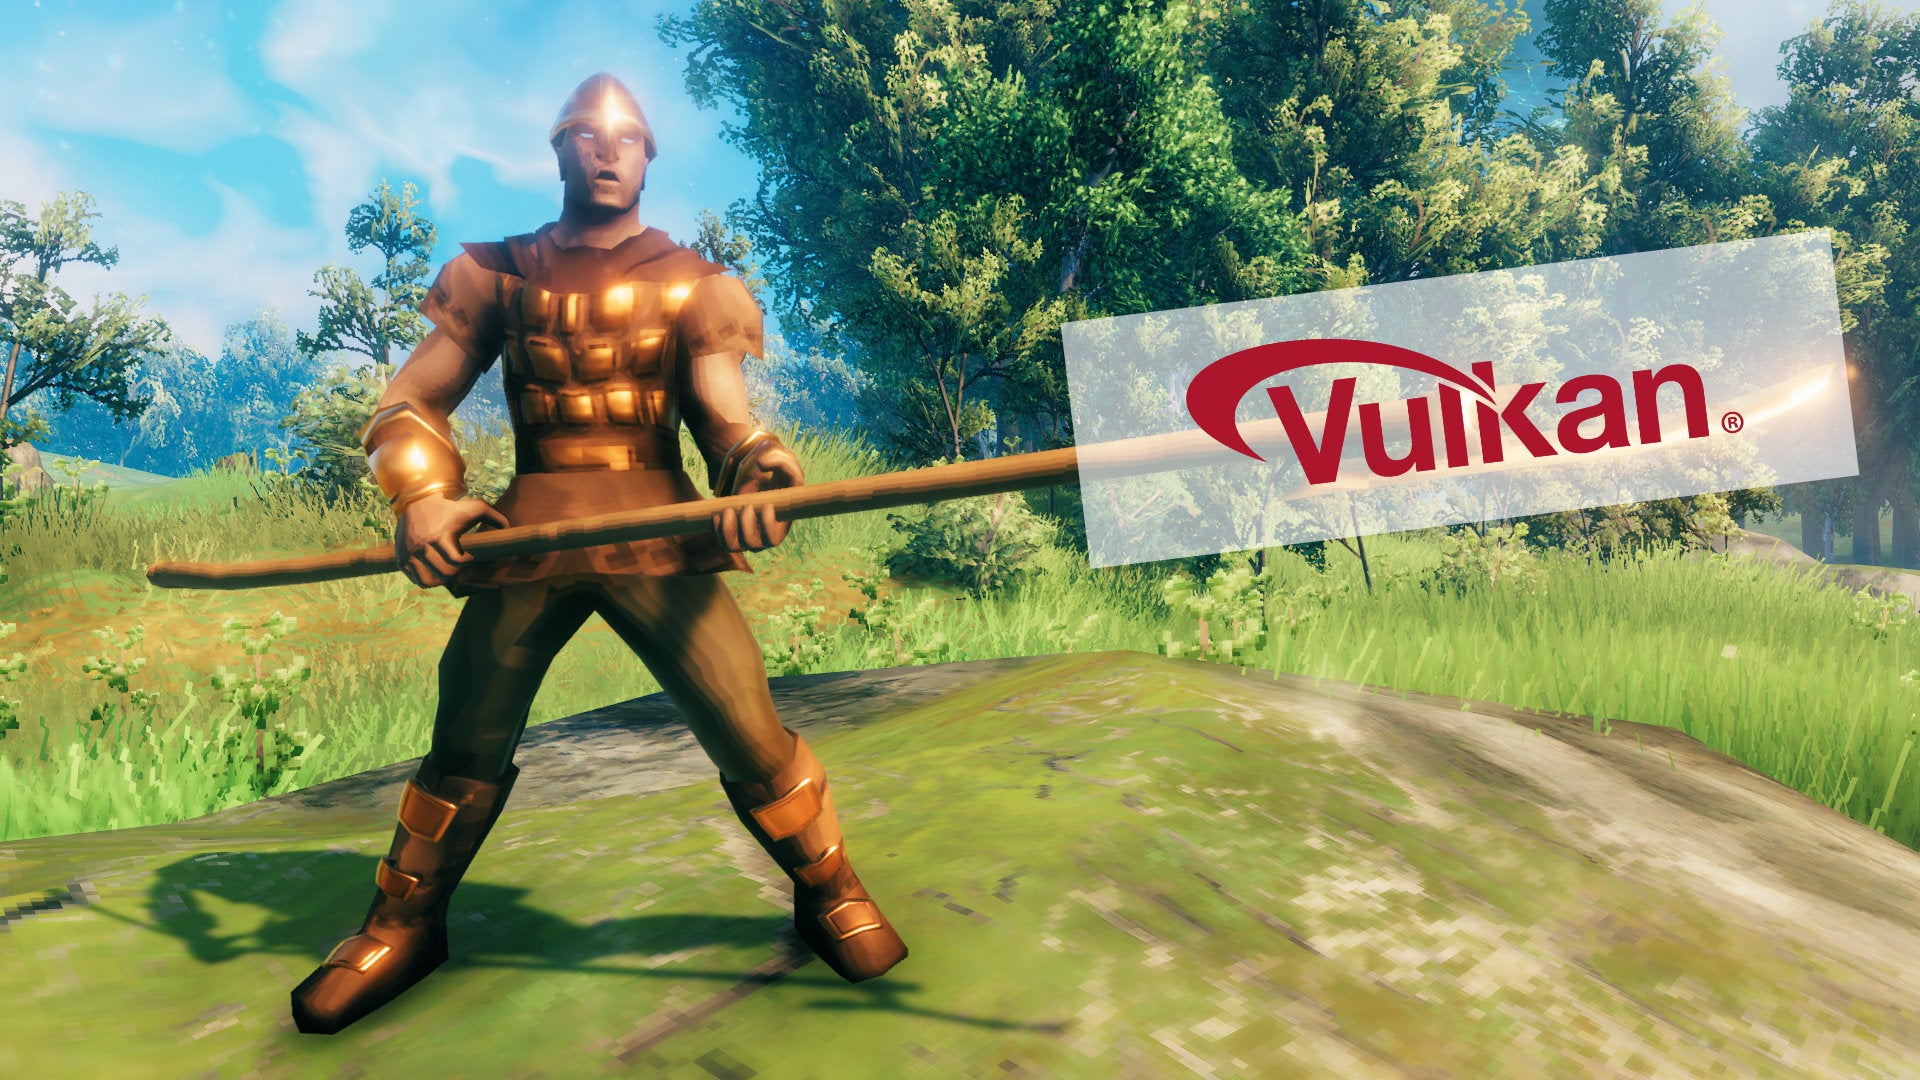 A Valheim screenshot of a player clad in full Bronze Armor, wielding a Bronze Atgeir - and the Vulkan logo has been pasted over the Atgeir's blade.